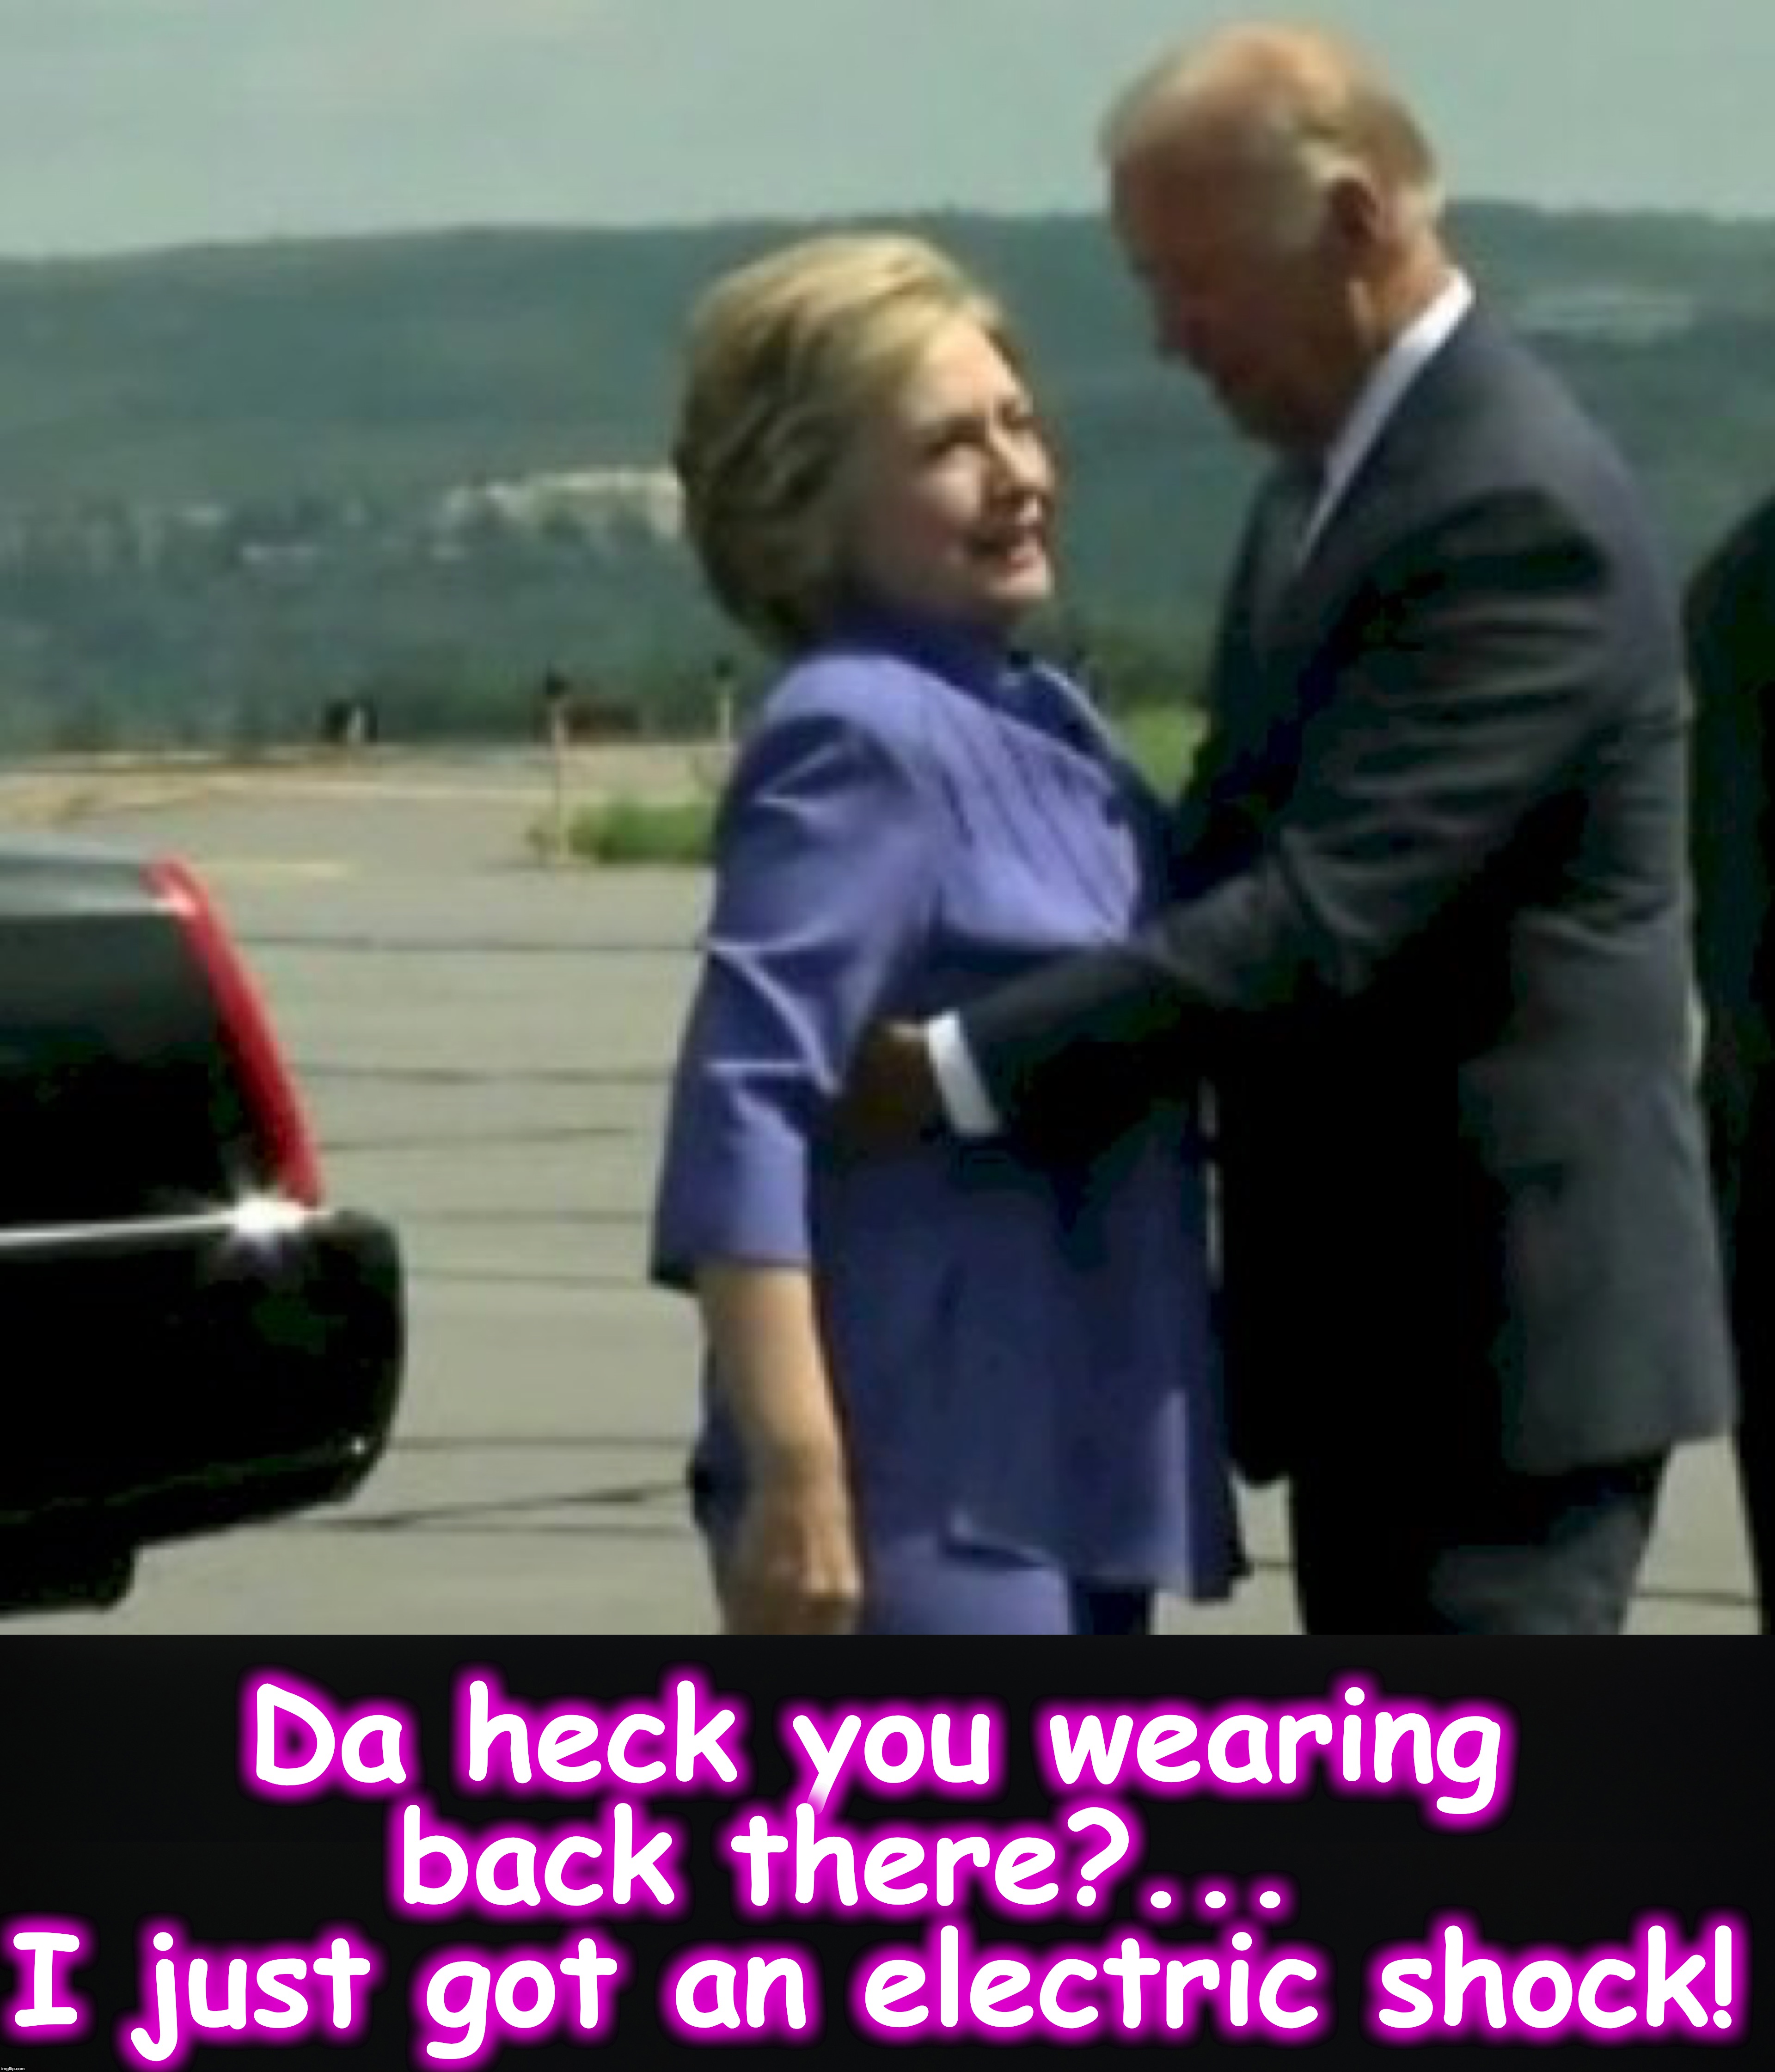 Da heck you wearing back there?... 
I just got an electric shock! | image tagged in hillary joe biden | made w/ Imgflip meme maker